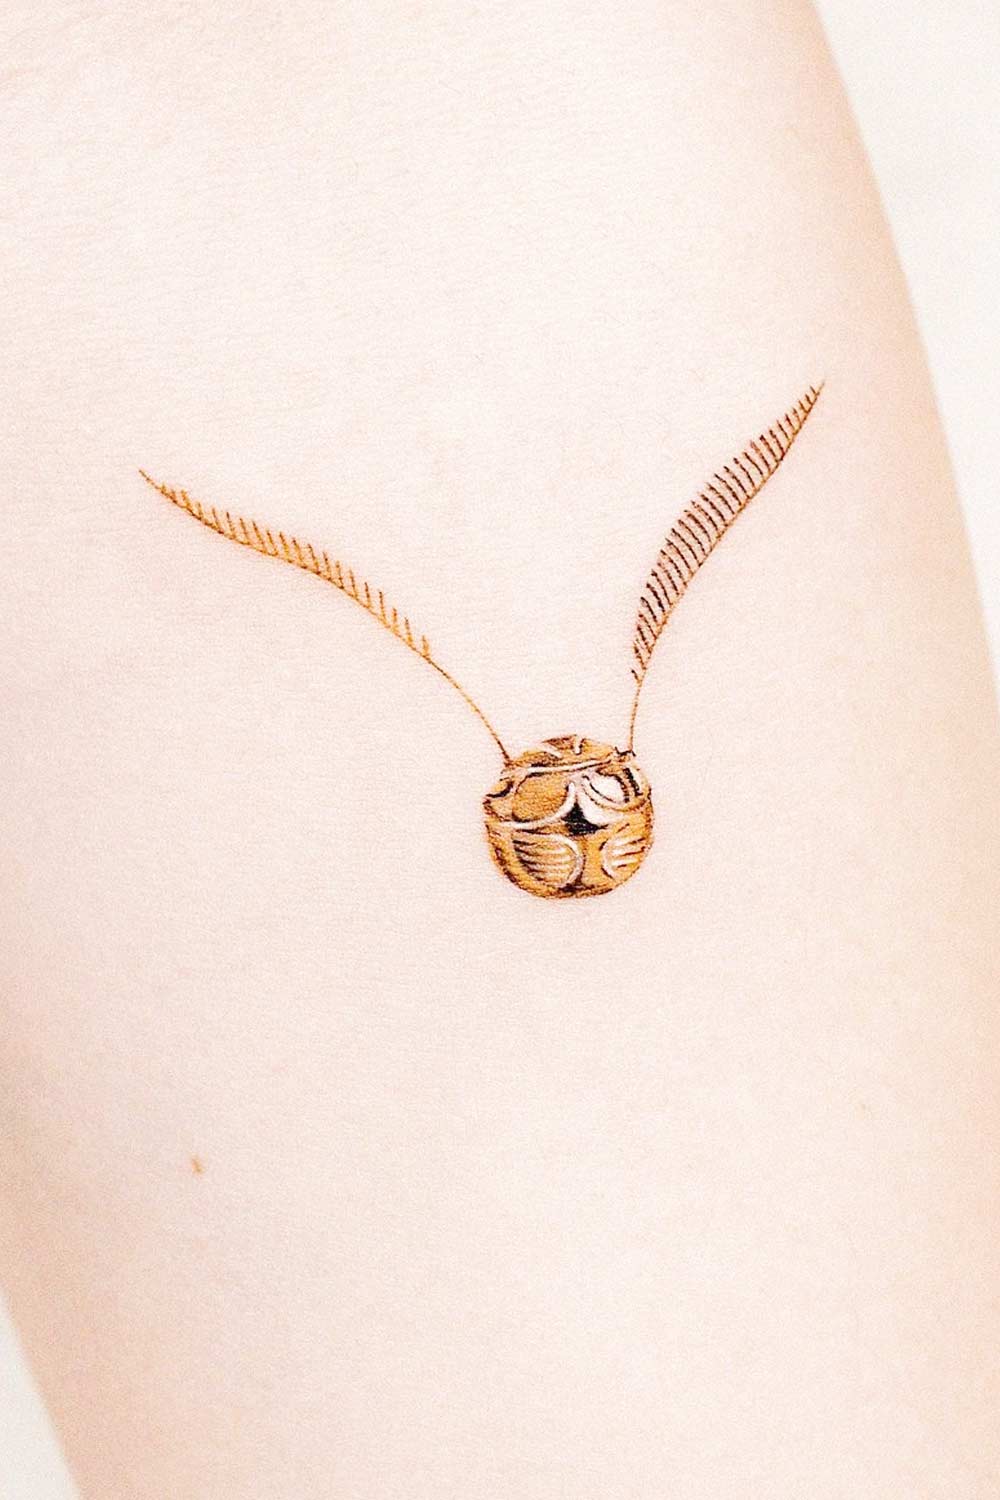 Golden Snitch Harry Potter Theme Tattoo